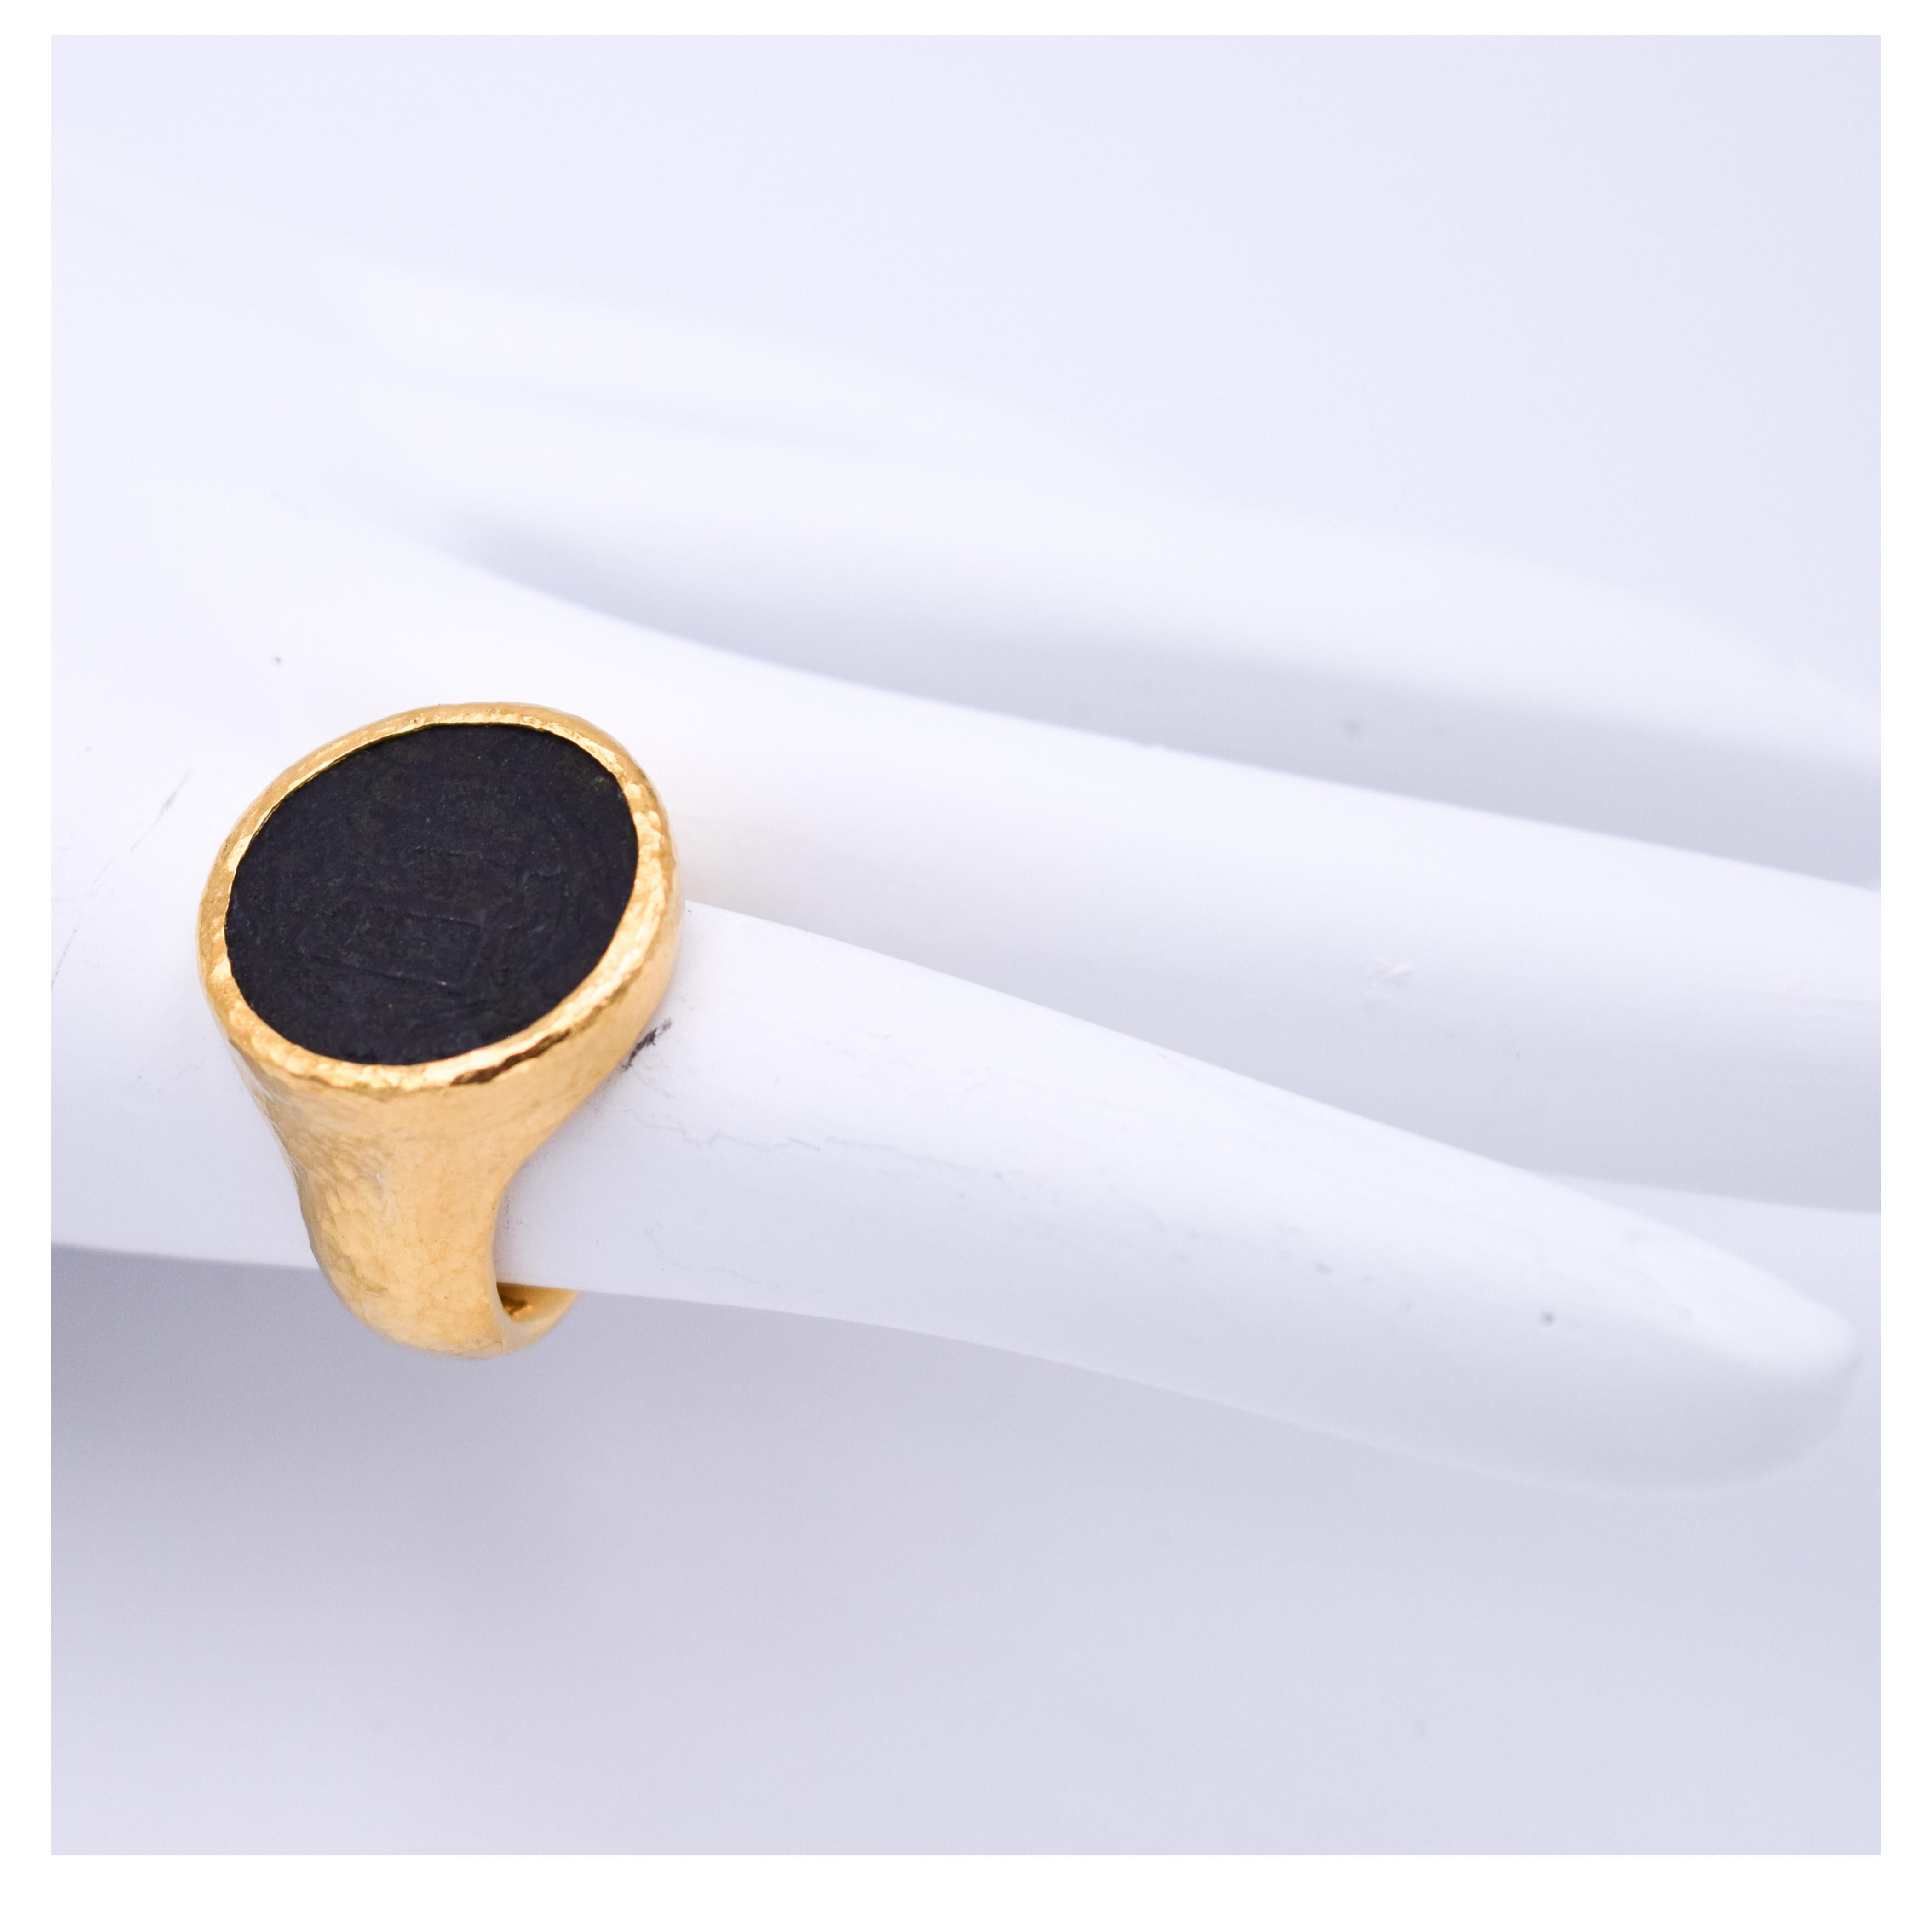 From Gurhan’s remarkable collection of handmade 24k gold treasures, inspired by the sensuality of pure gold, each jewel illuminates the golden warmth of the feminine spirit.

One of a kind bronze coin ring in 24k with a wide gold